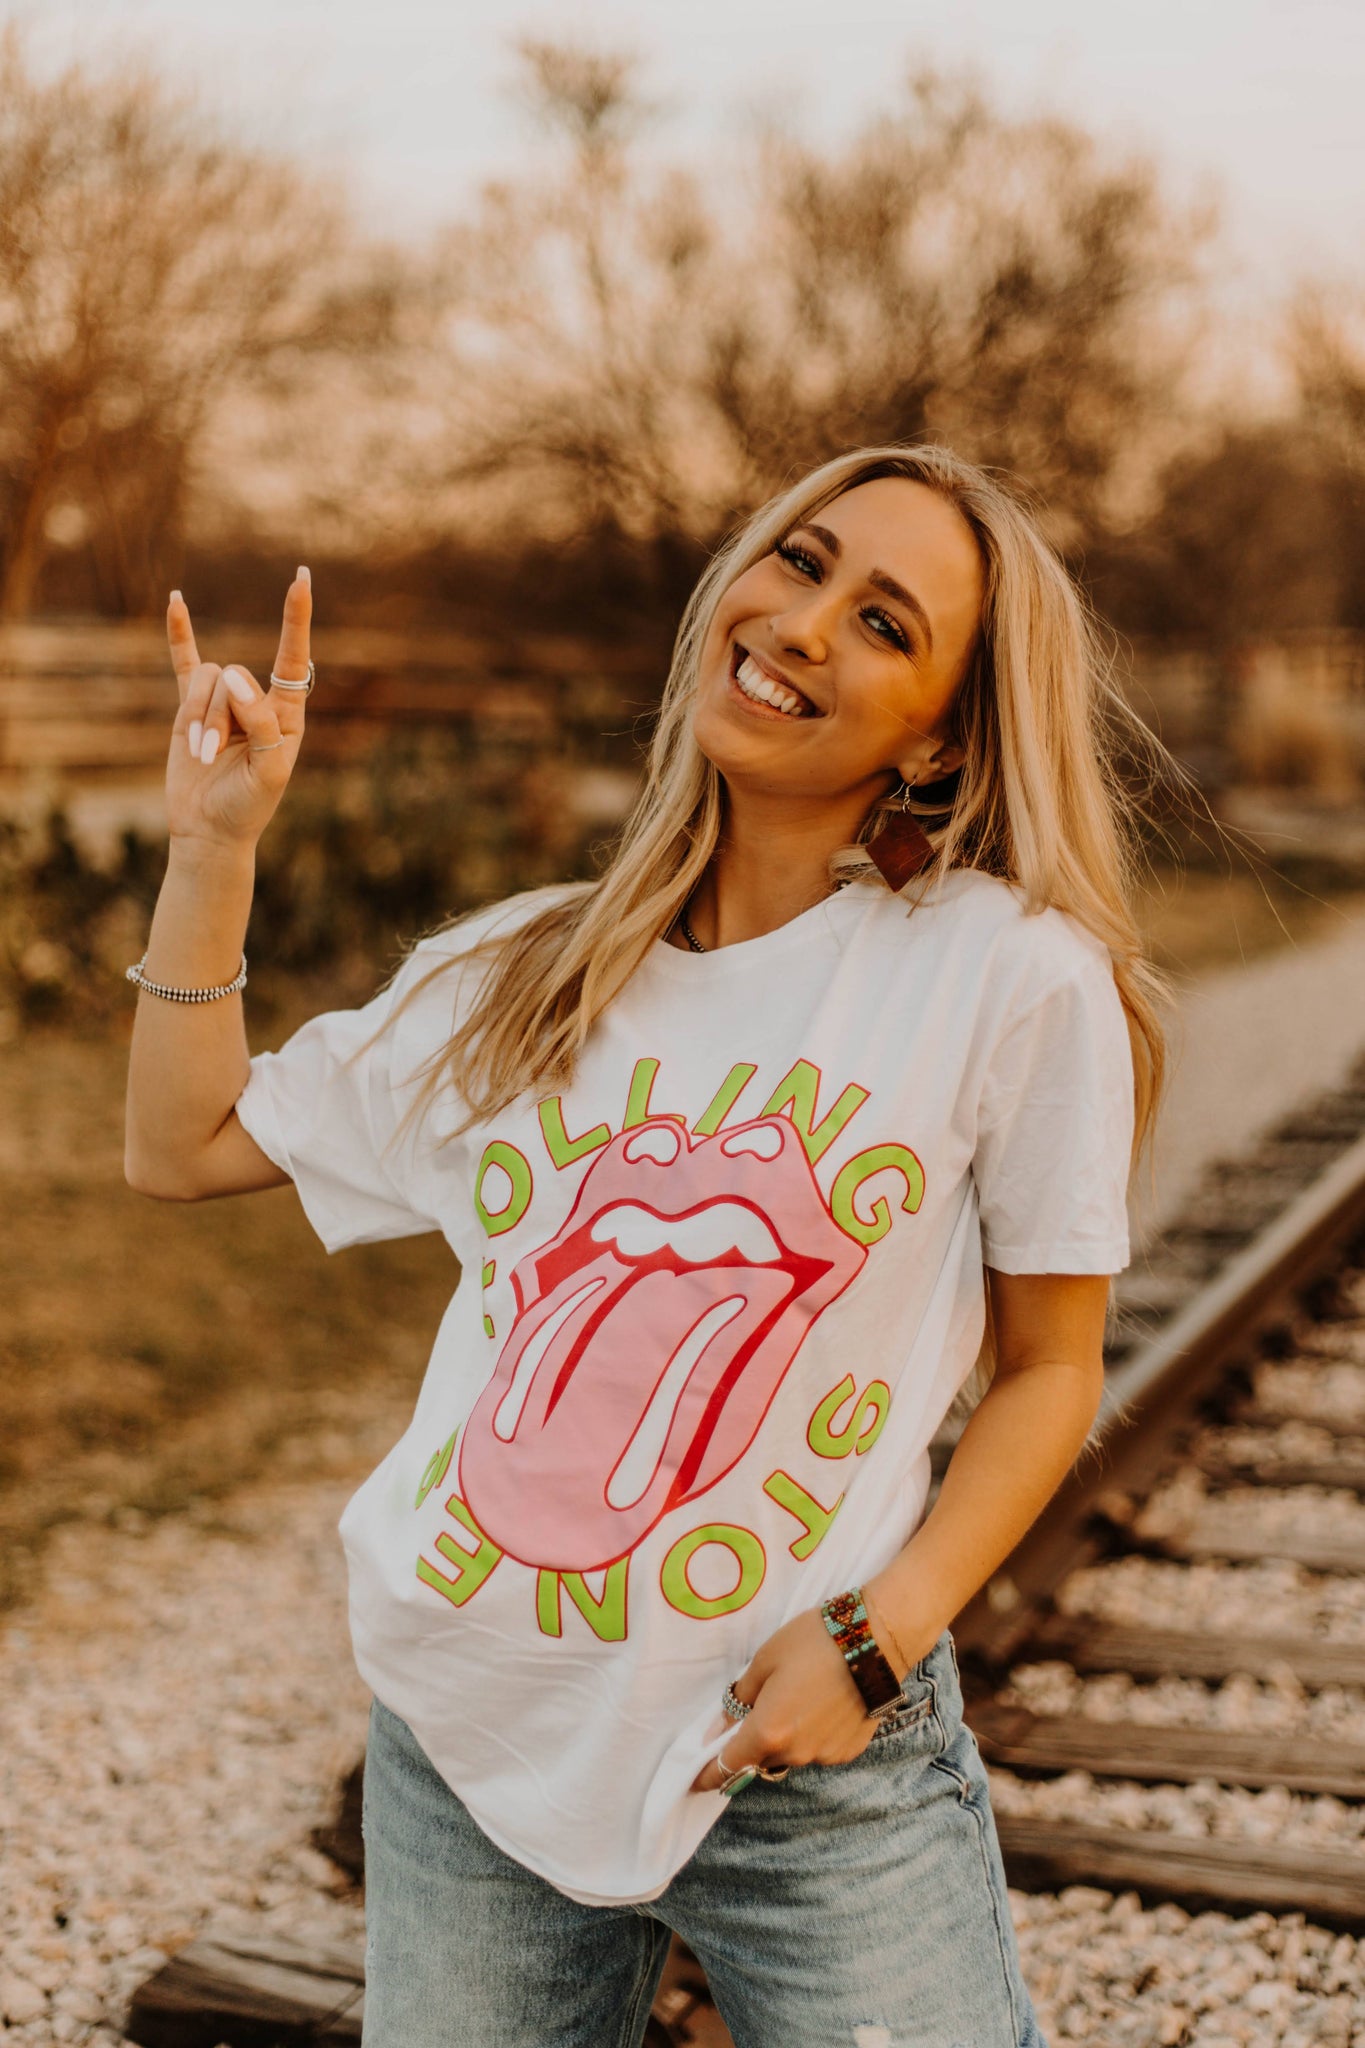 Neon Puffy Paint Rolling Stones White Tee